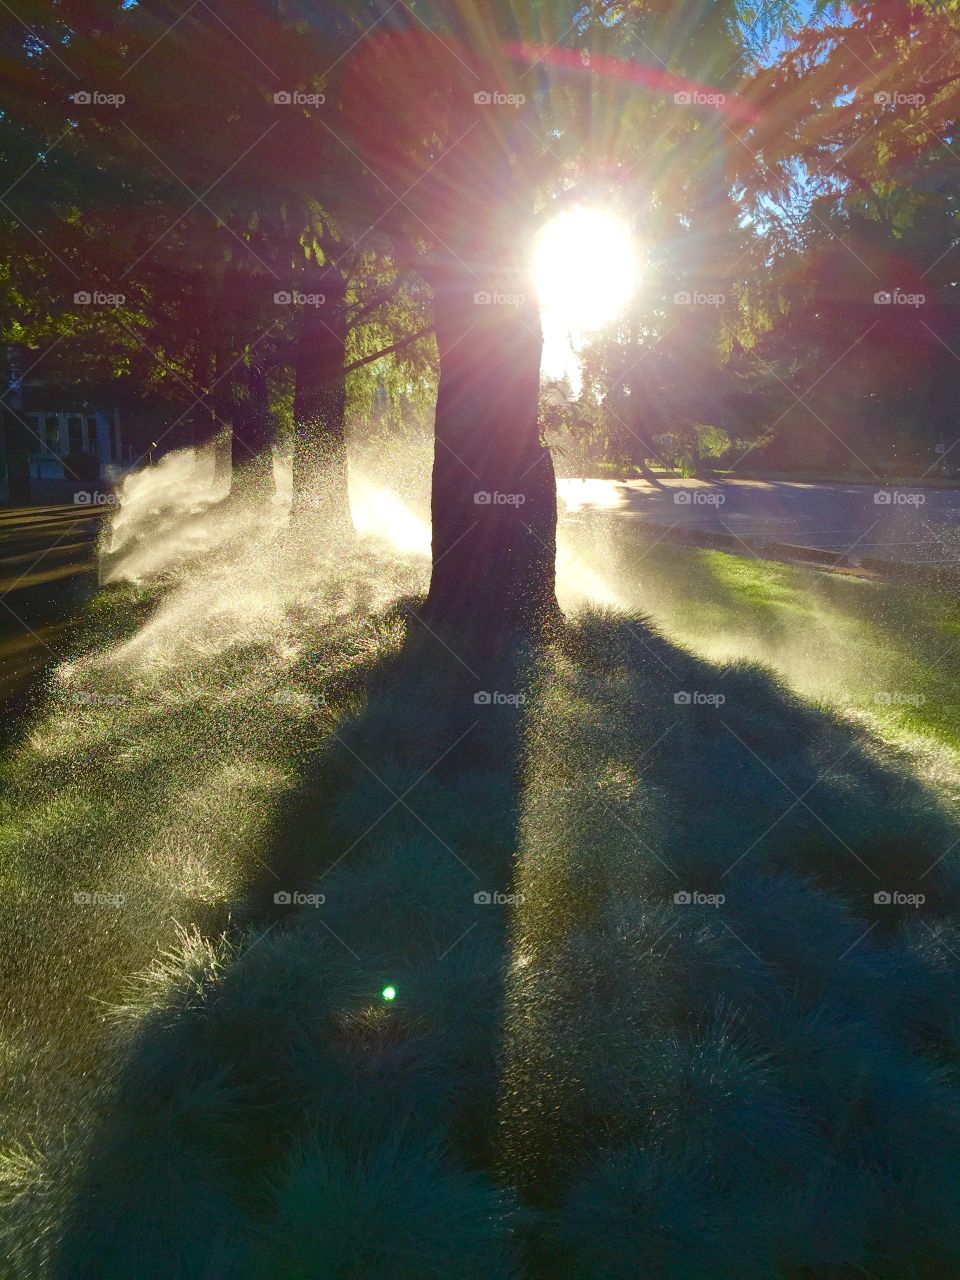 Sprinklers in the park by the sunrise